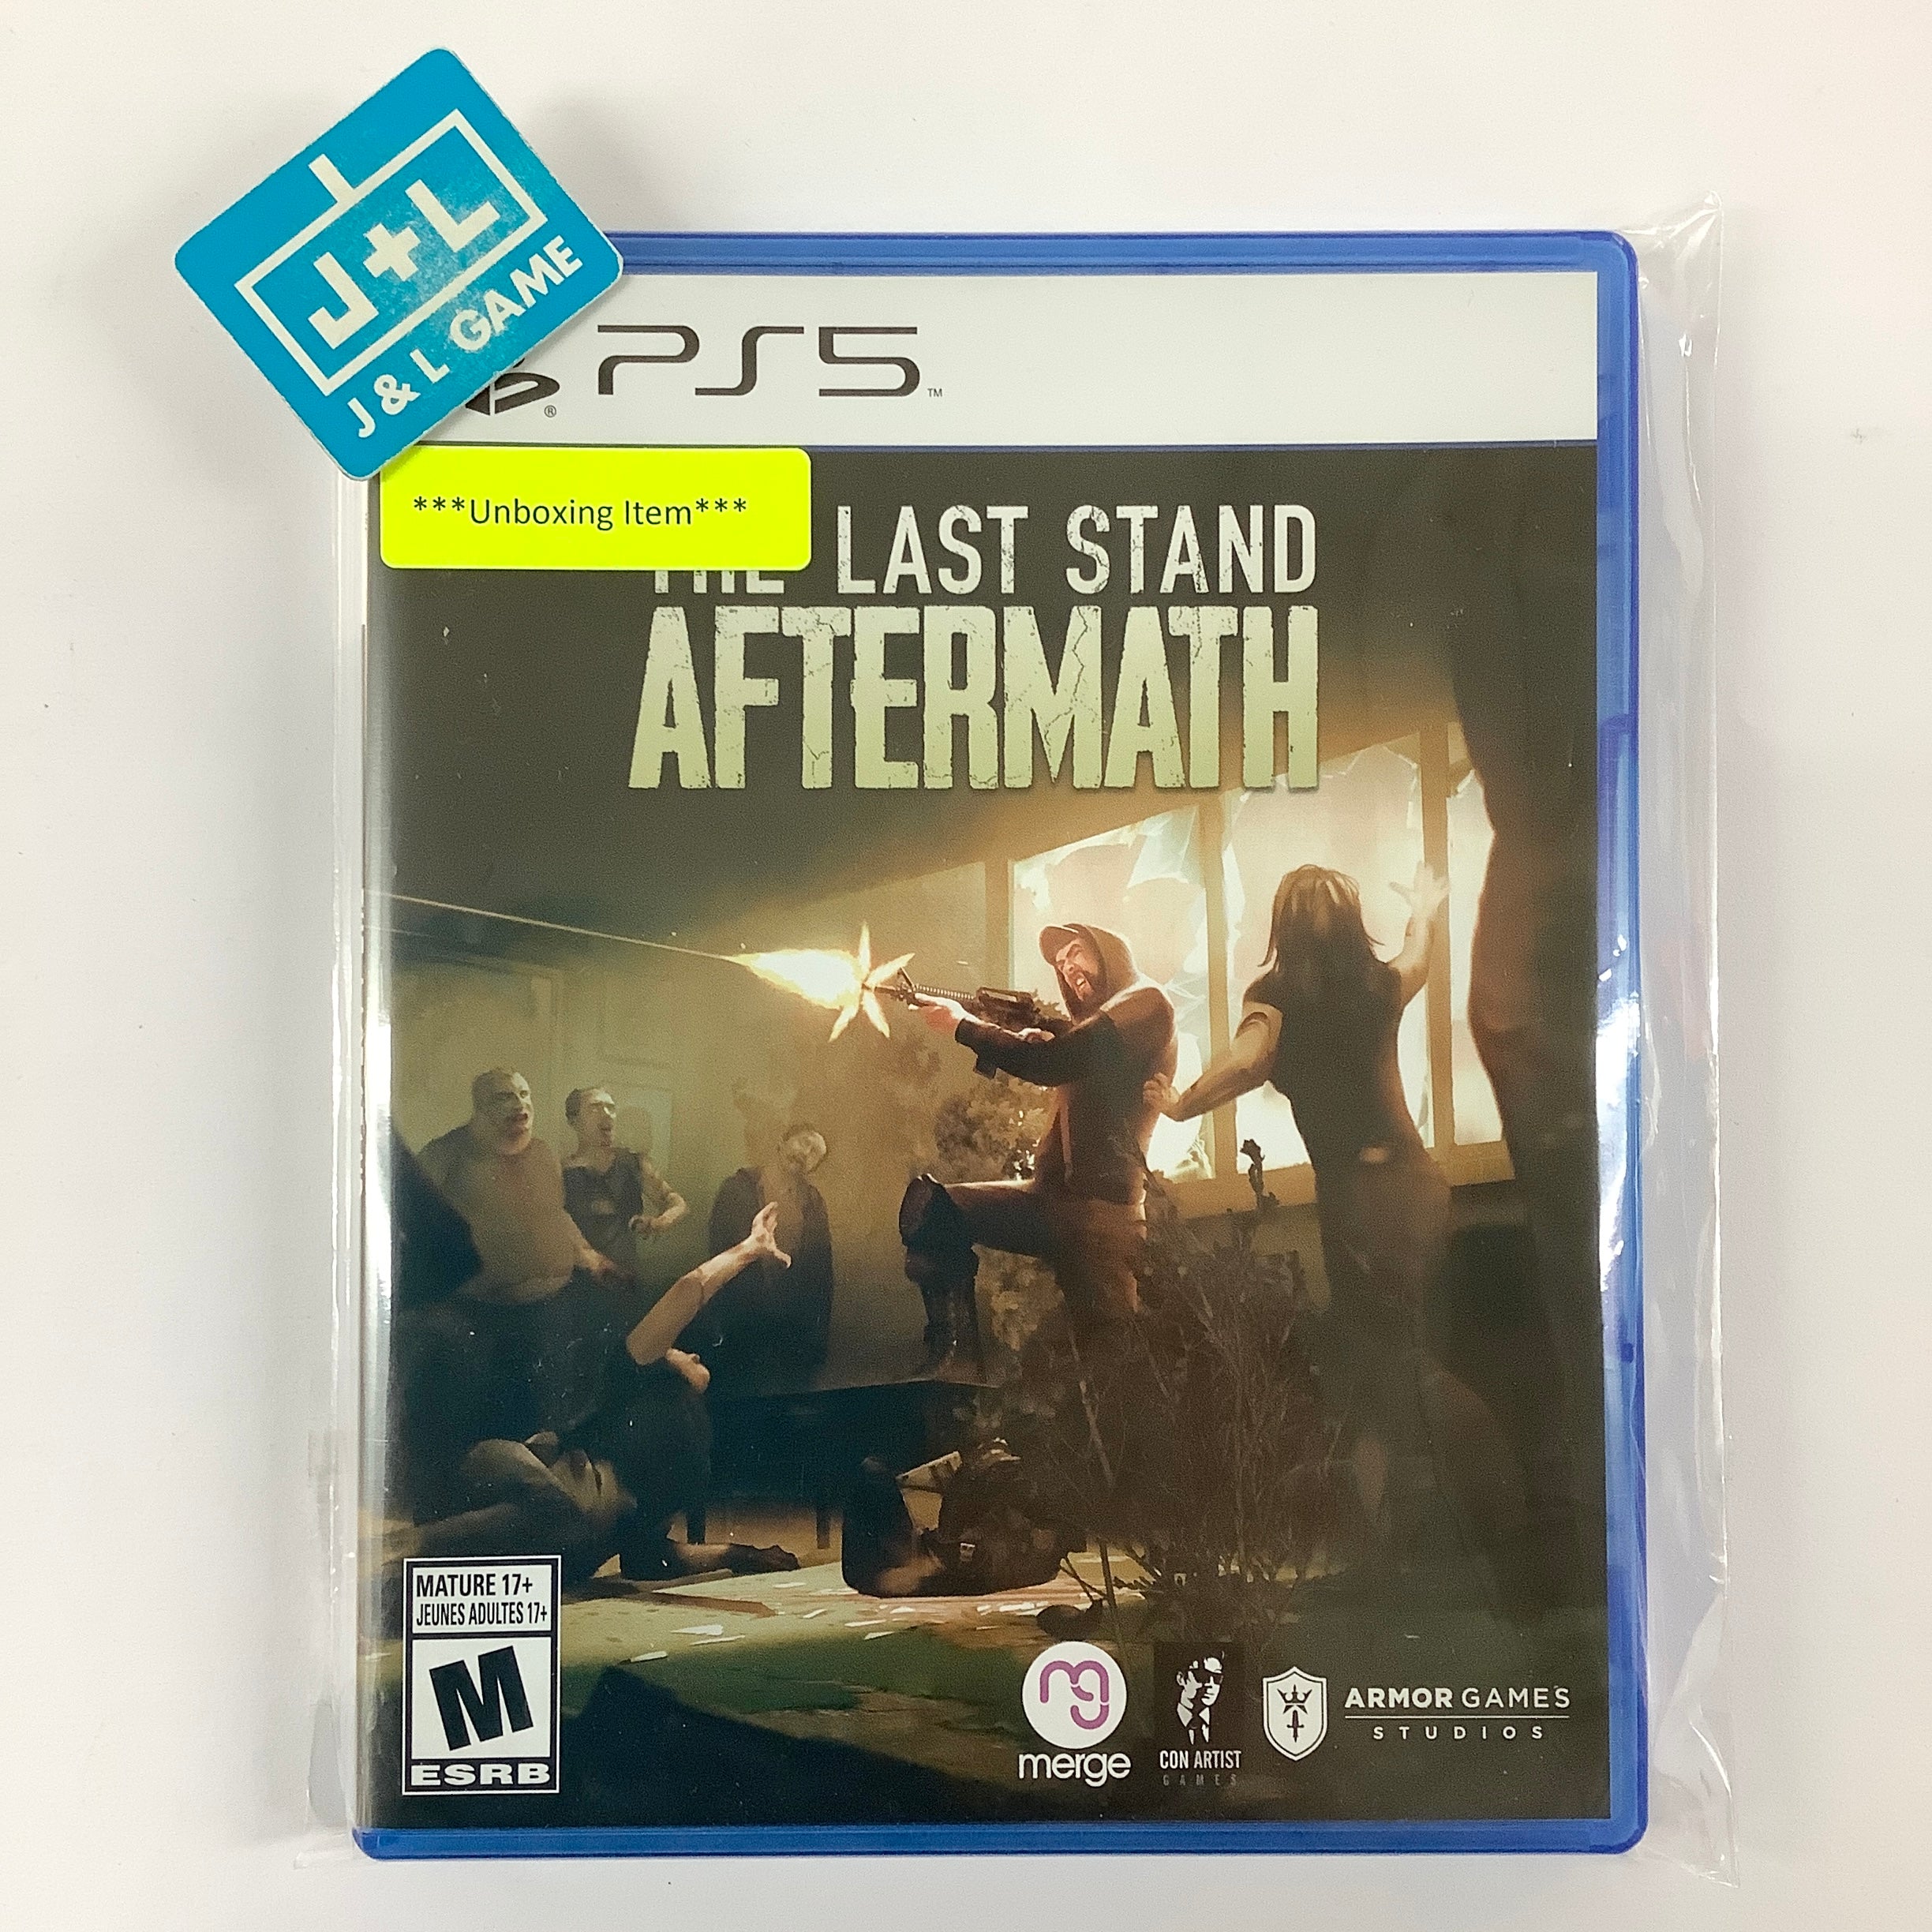 The Last Stand: Aftermath - (PS5) PlayStation 5 [UNBOXING] Video Games Merge Games   